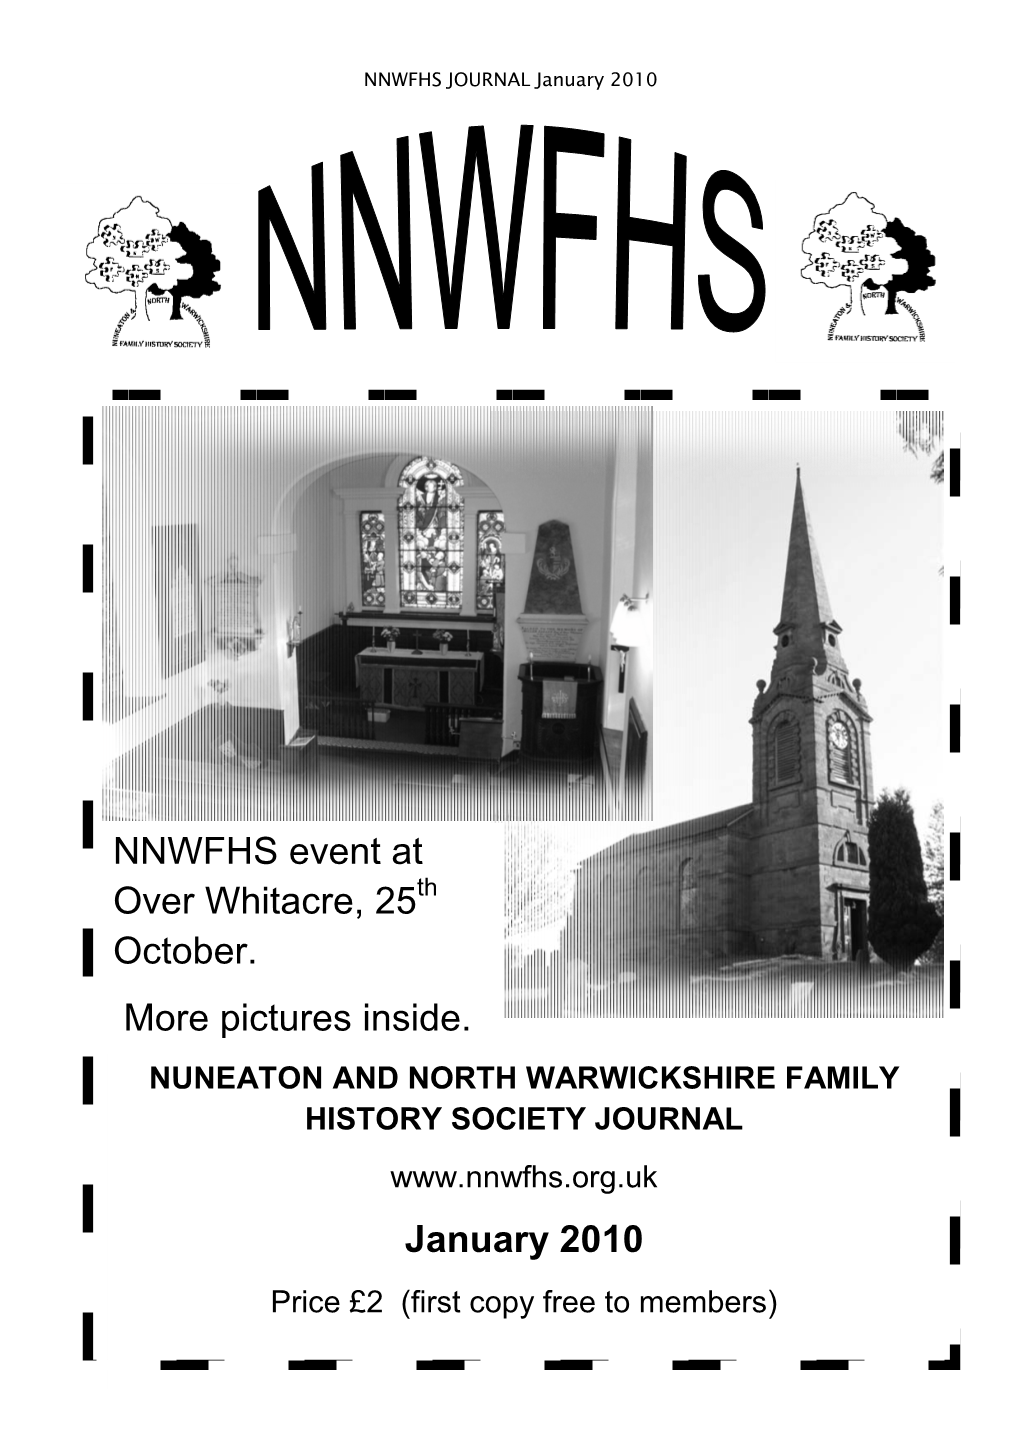 January 2010 NNWFHS Event at Over Whitacre, 25 October. More Pictures